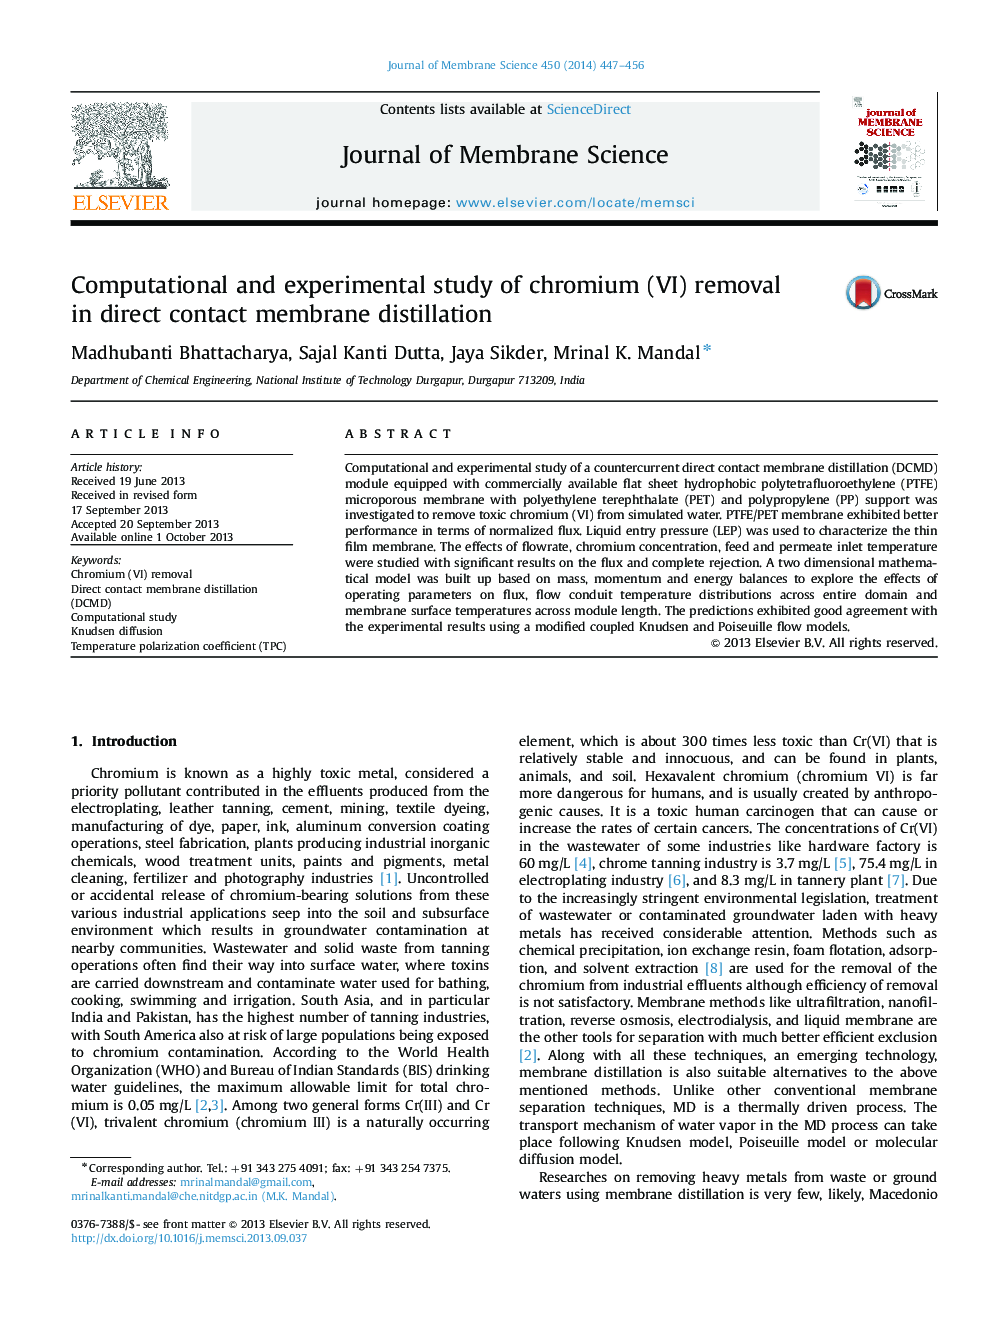 Computational and experimental study of chromium (VI) removal in direct contact membrane distillation